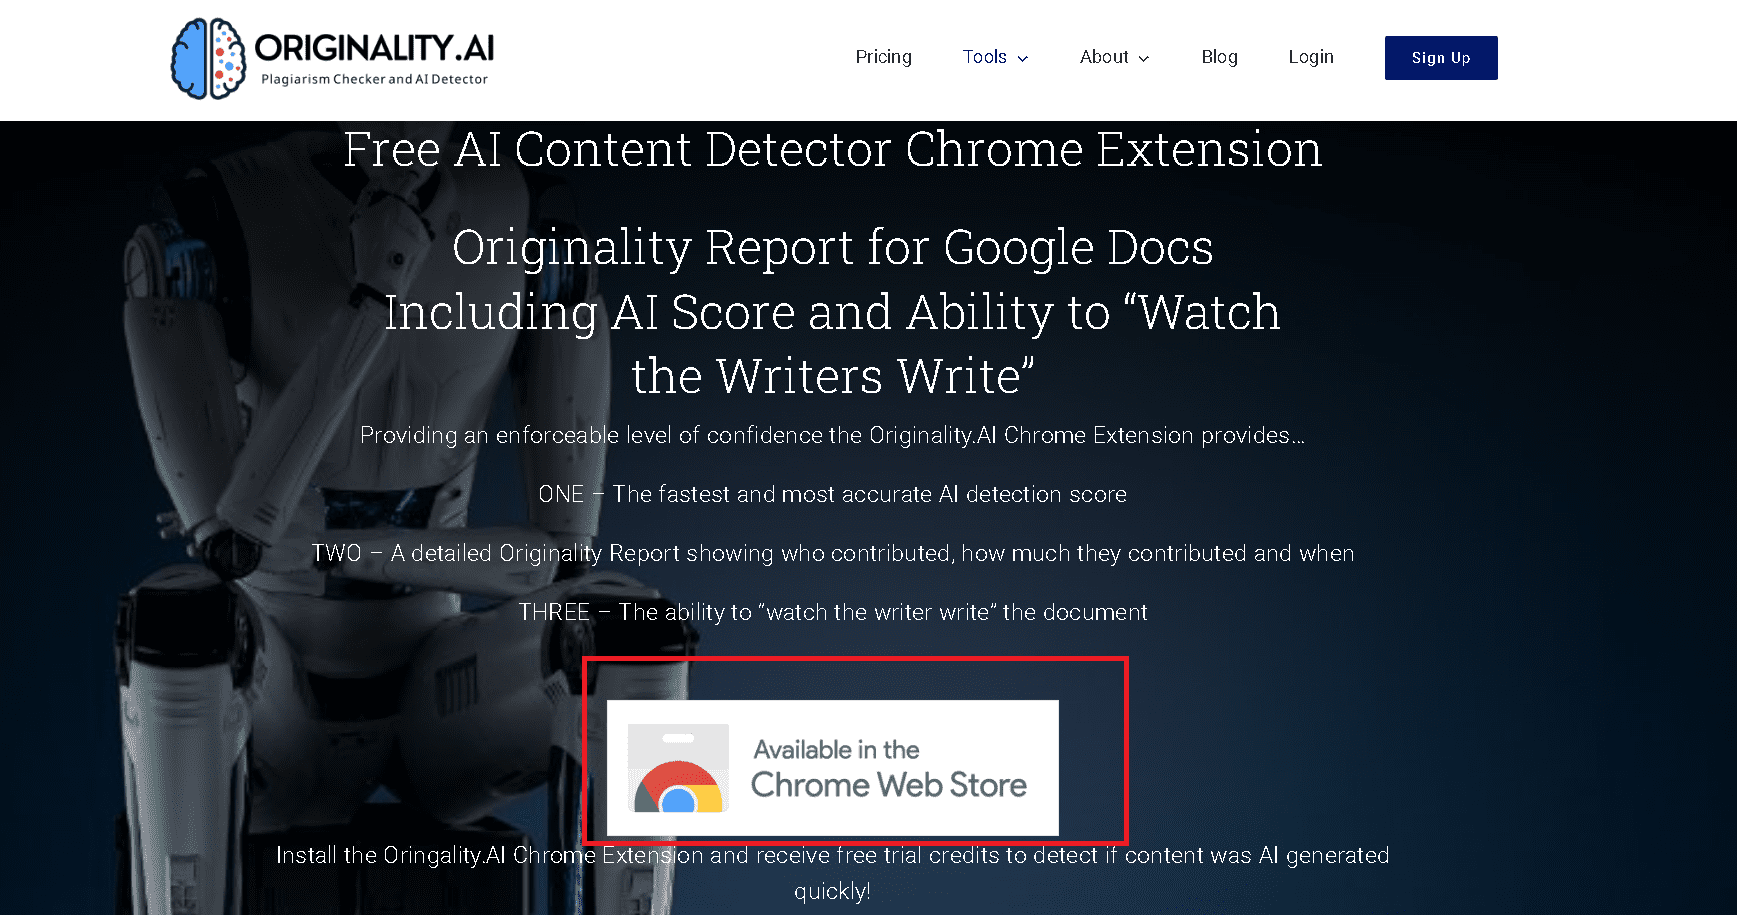 Originality.ai Chrome extension official page- a way to get a free trial